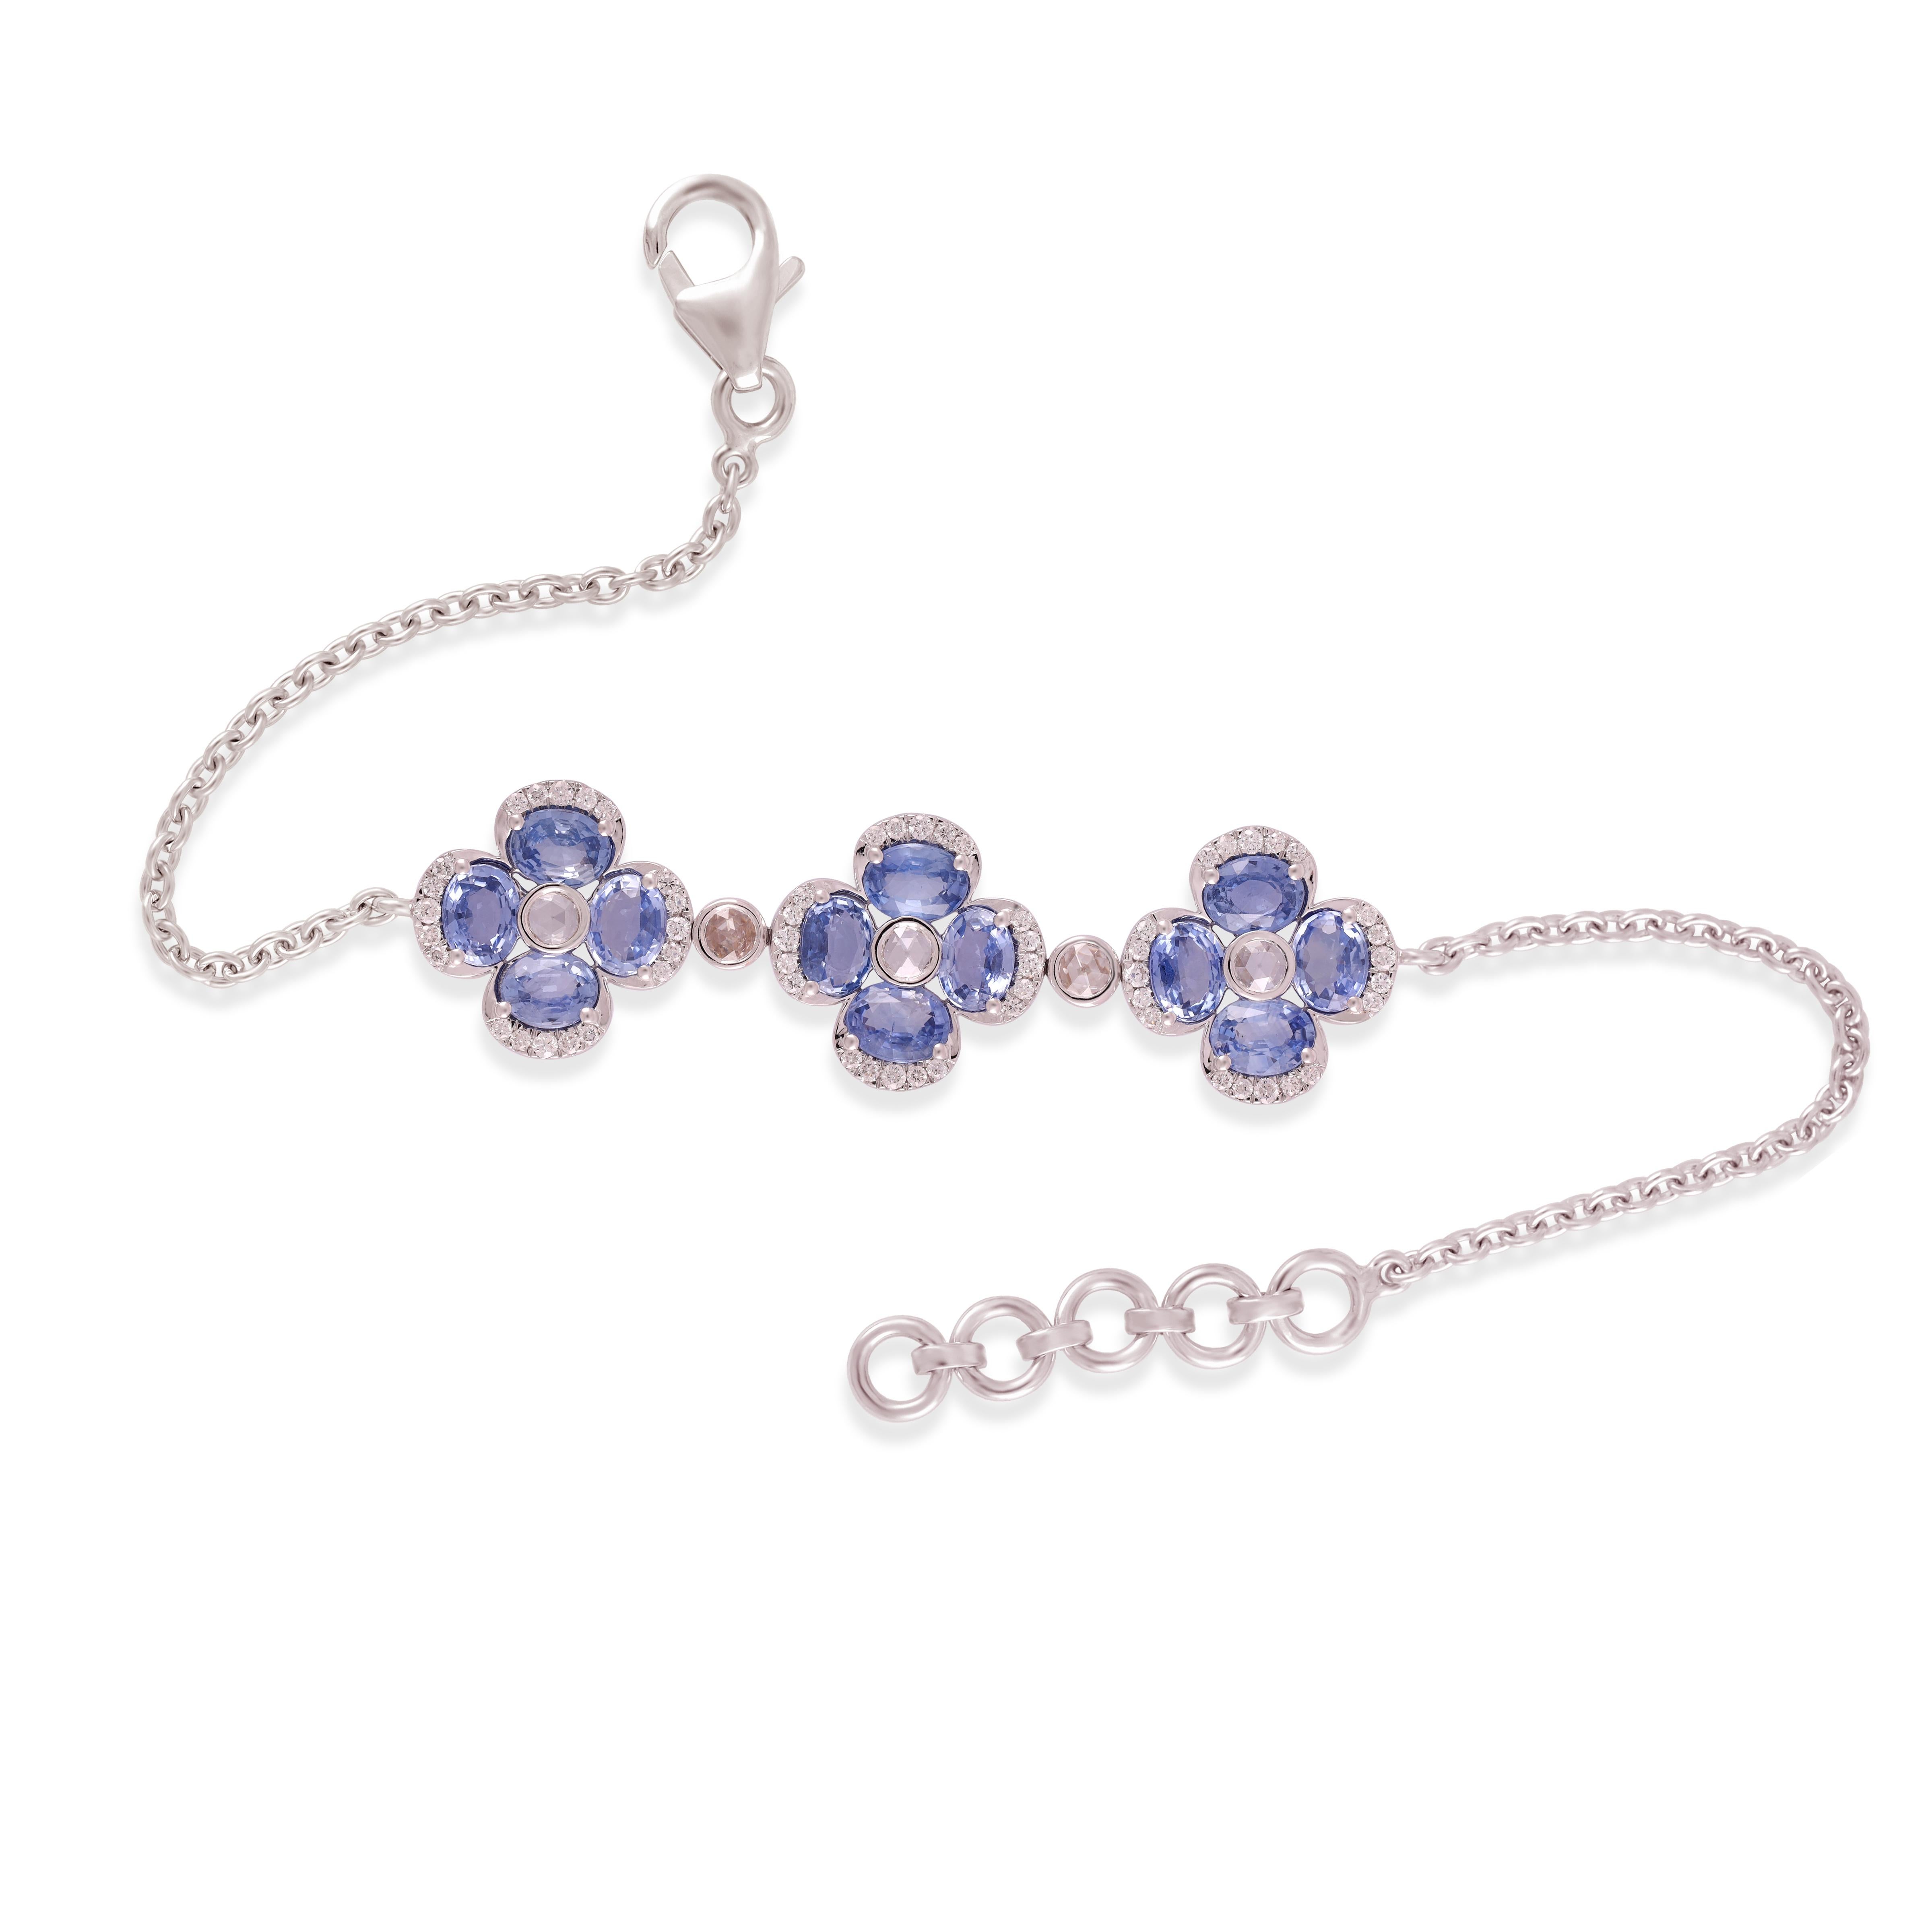 4.53 Carat Sapphire
 and Diamond  Bracelet in 18K White Gold

This magnificent Oval shape Sapphire Flower Bangle is incredulous. The solitaire Oval-shaped Oval-cut sapphires are beautifully With Single Rose cut Diamonds & Small Diamond making the